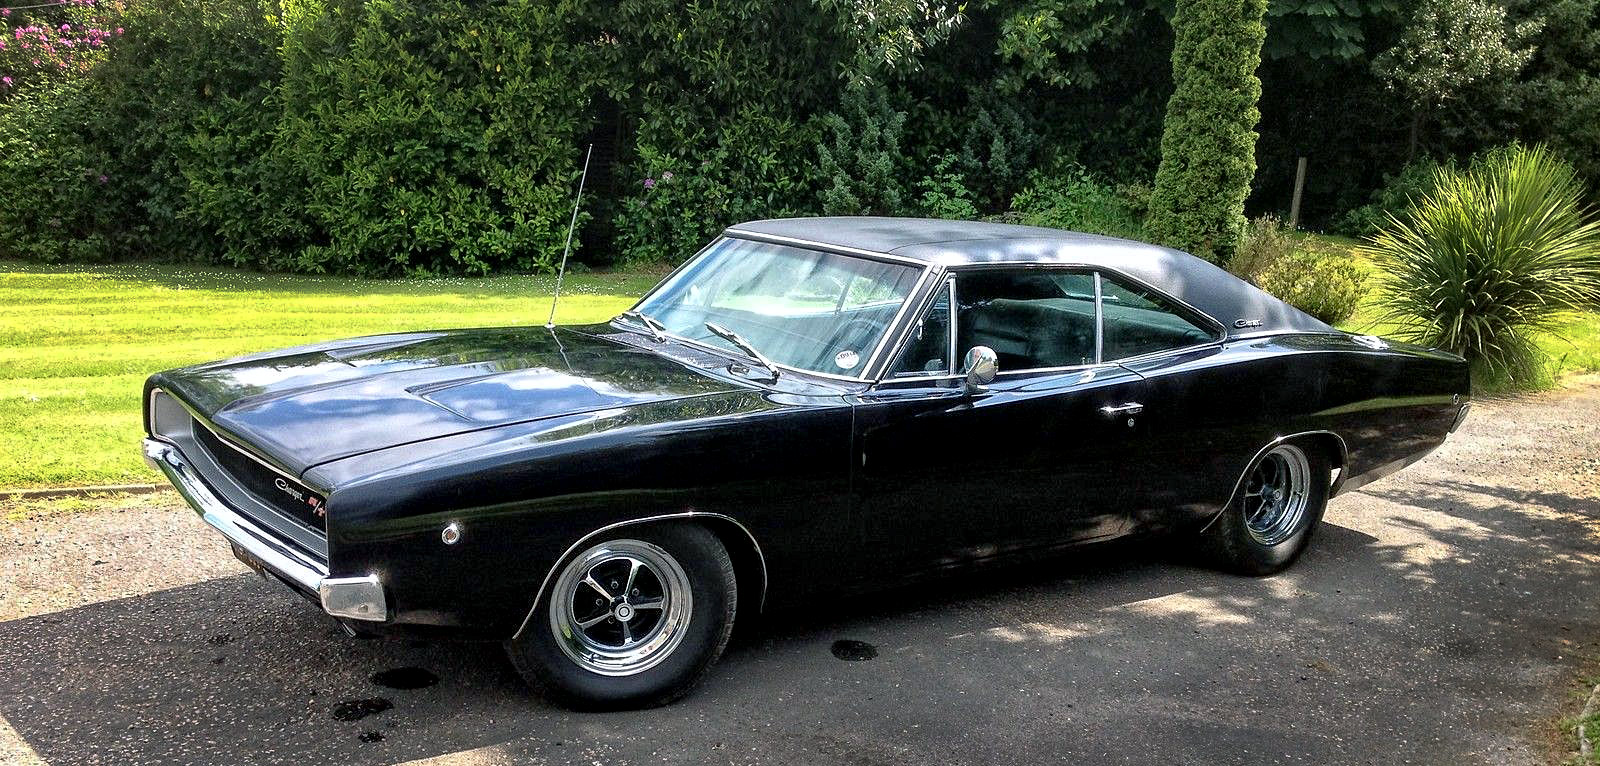 DODGE CHARGER 440 RT 1968